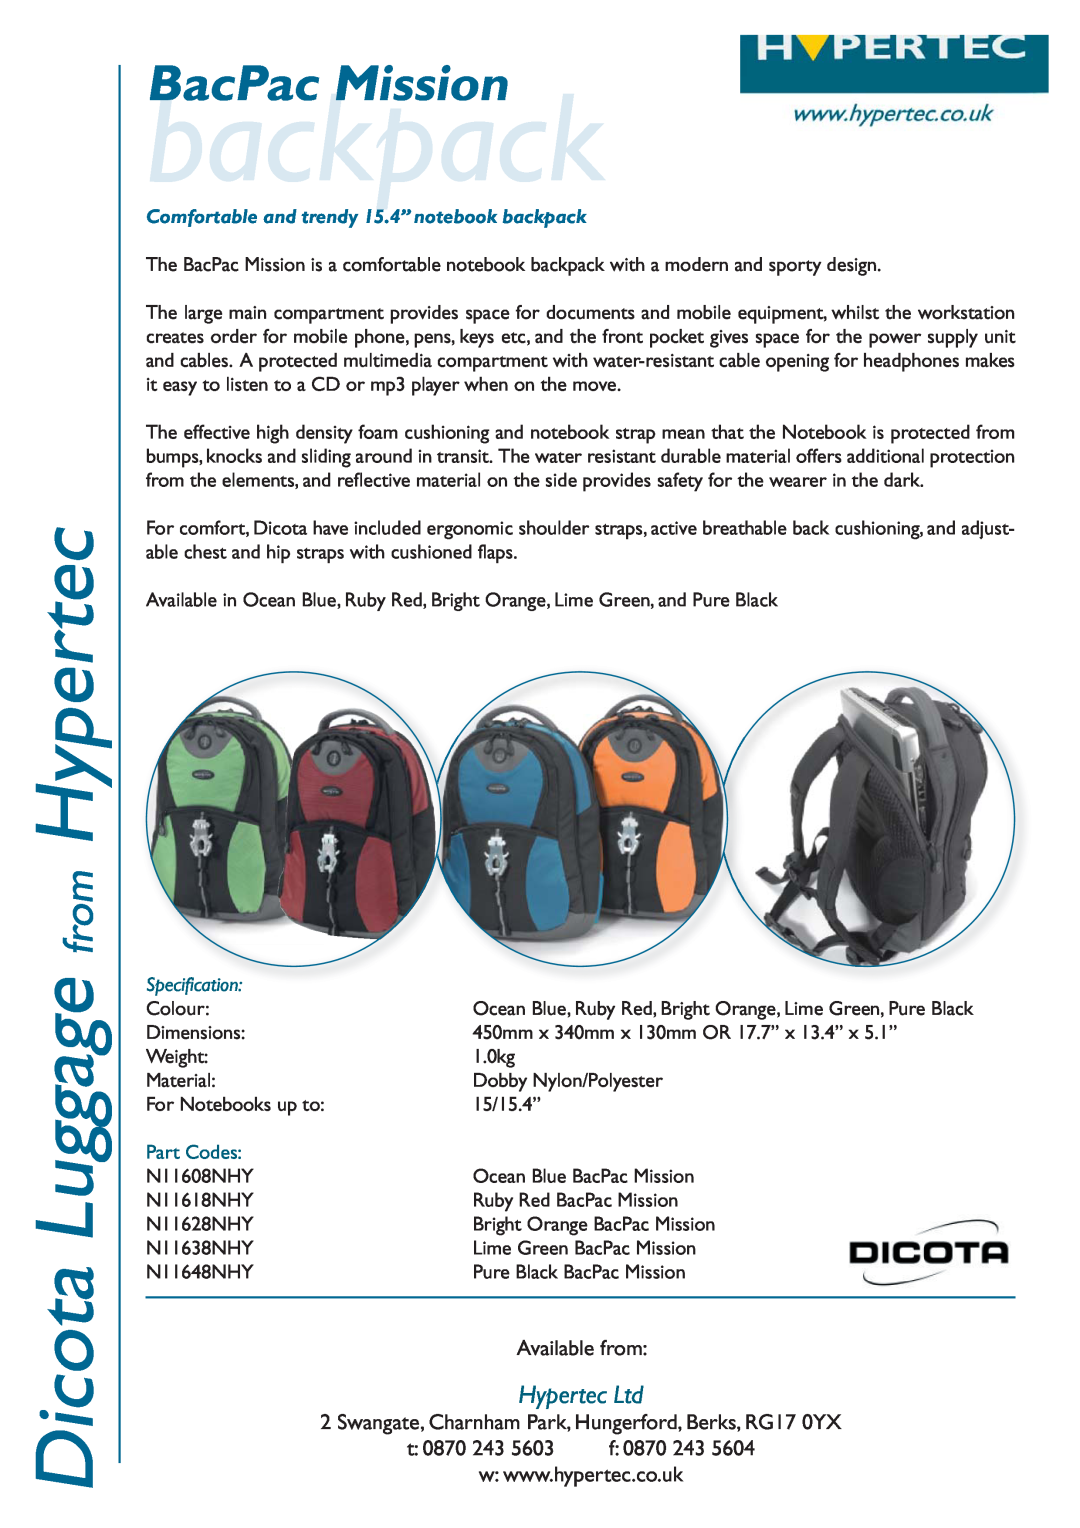 Hypertec N11628NHY dimensions backpack, Dicota Luggage from Hypertec, BacPac Mission, Available from, t 0870 243 